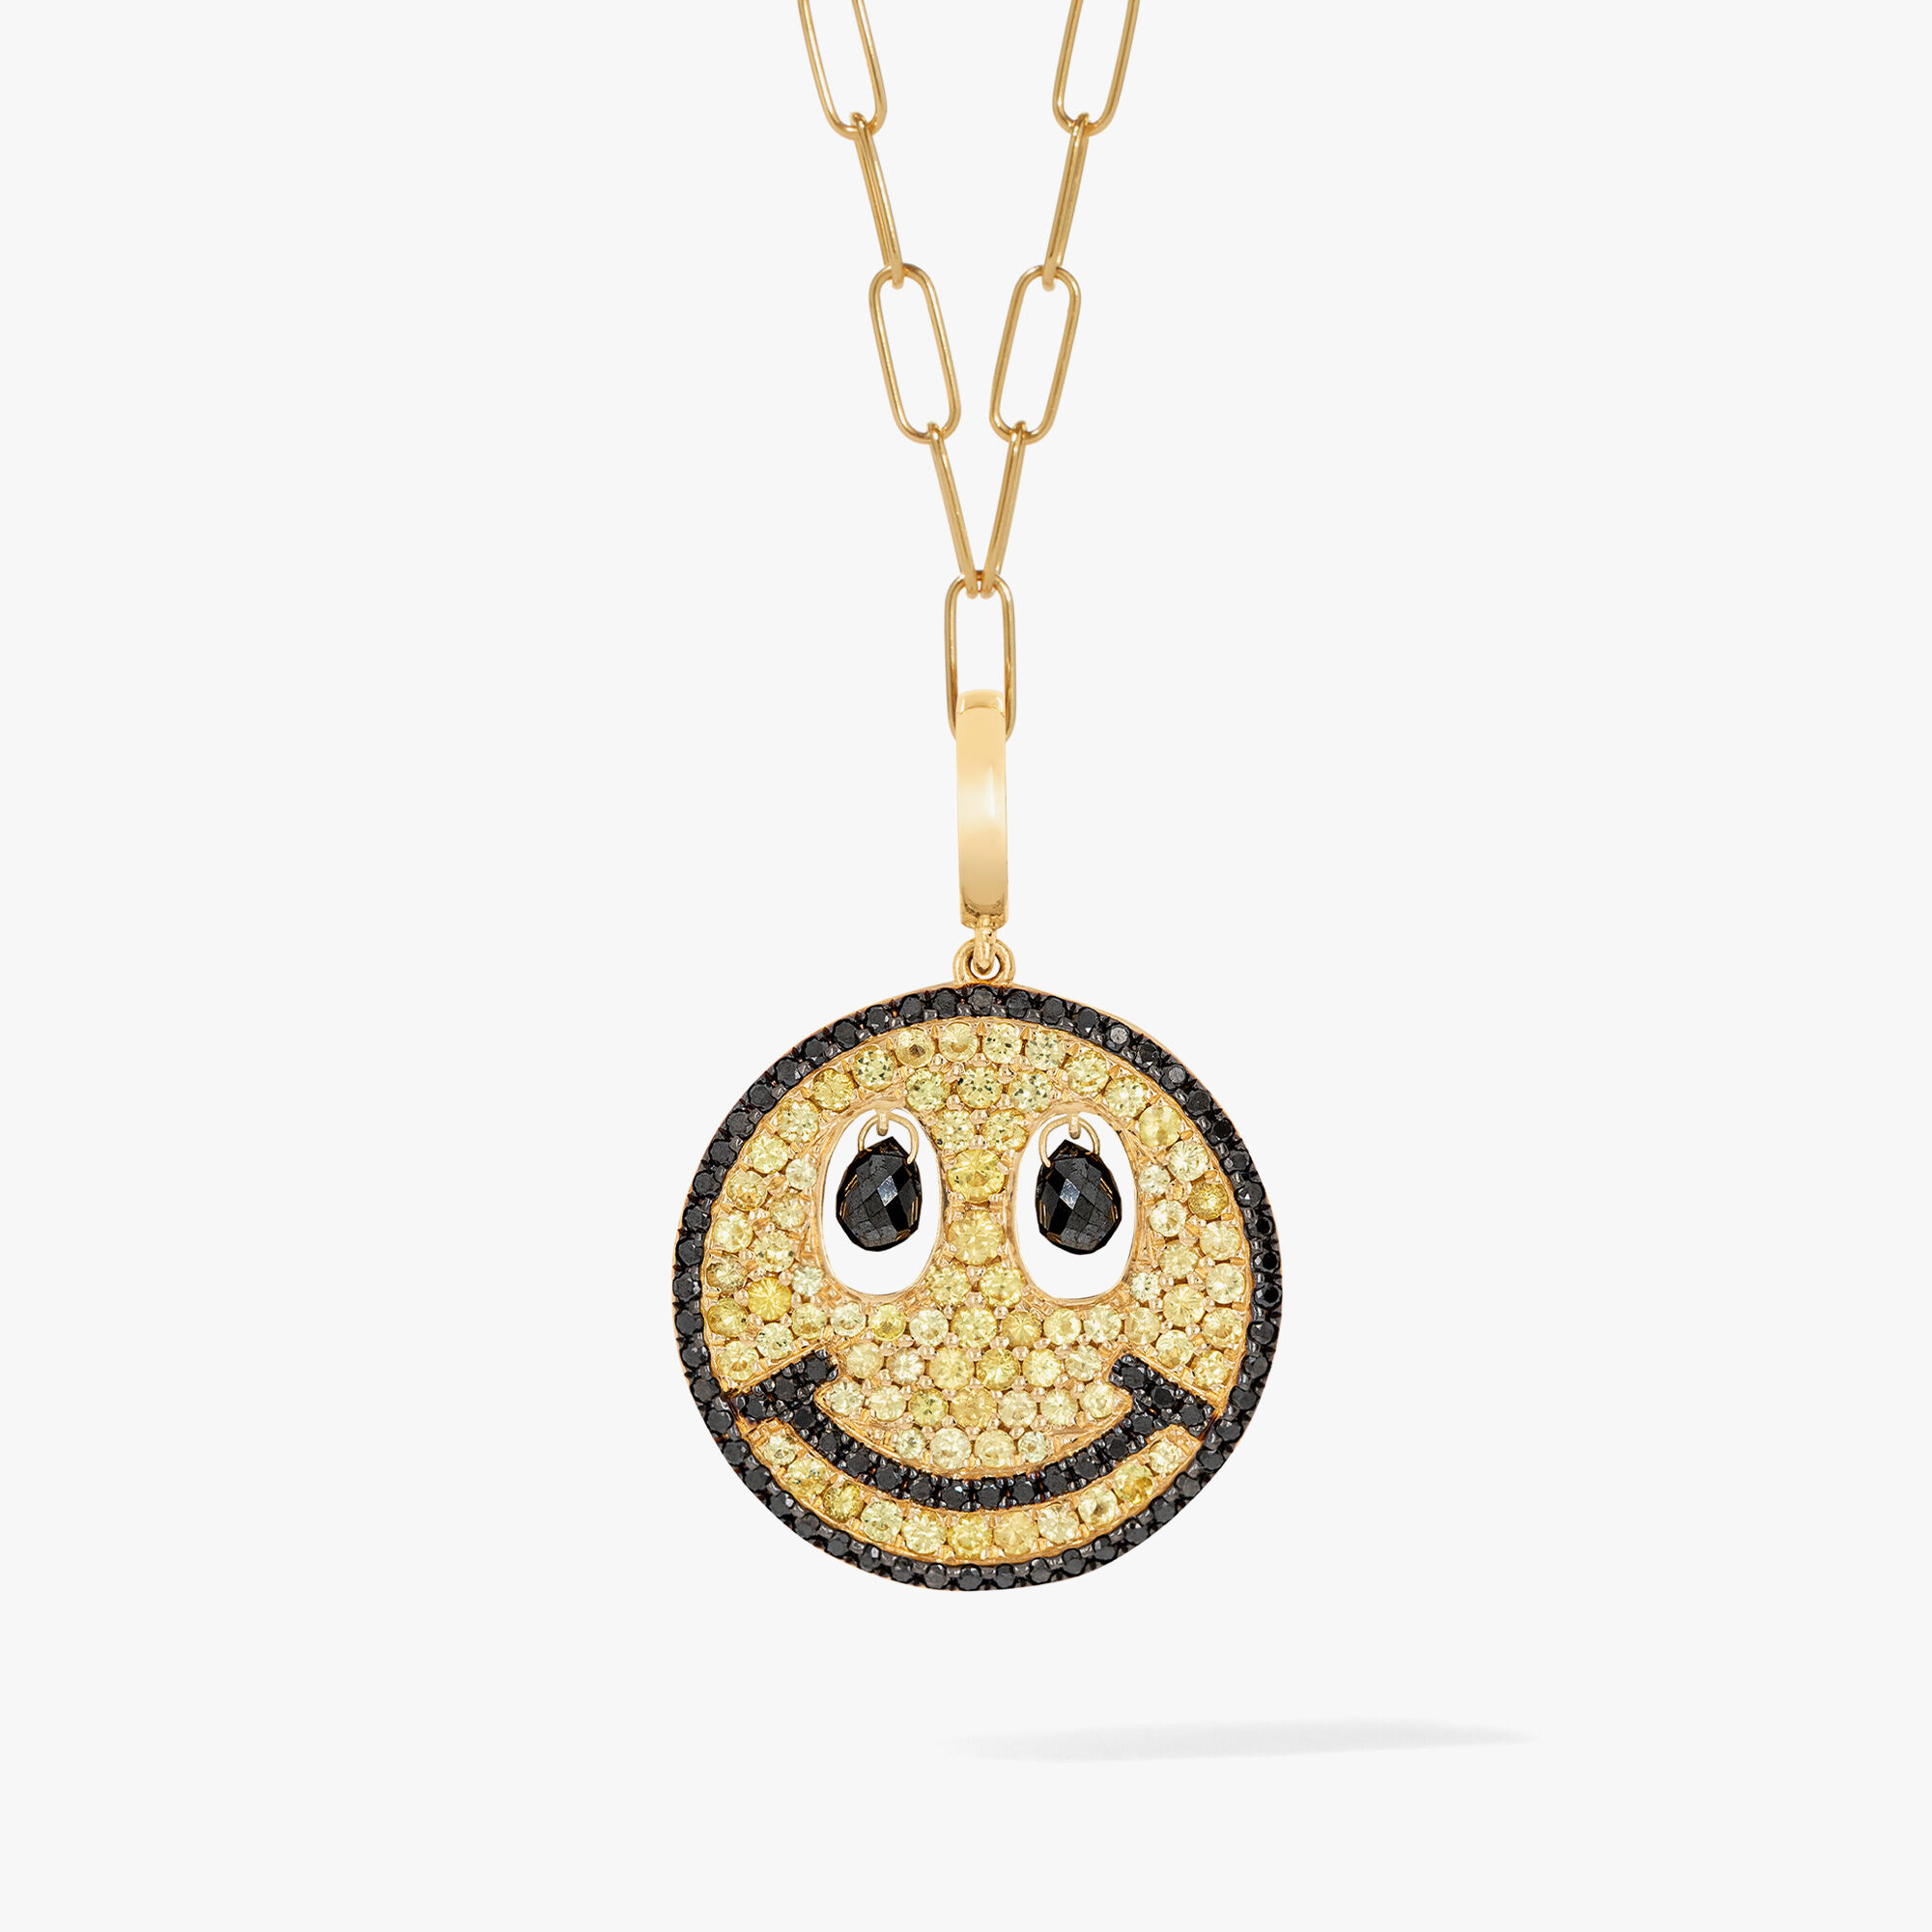 Gold Charm LV Necklace – Simply Caii